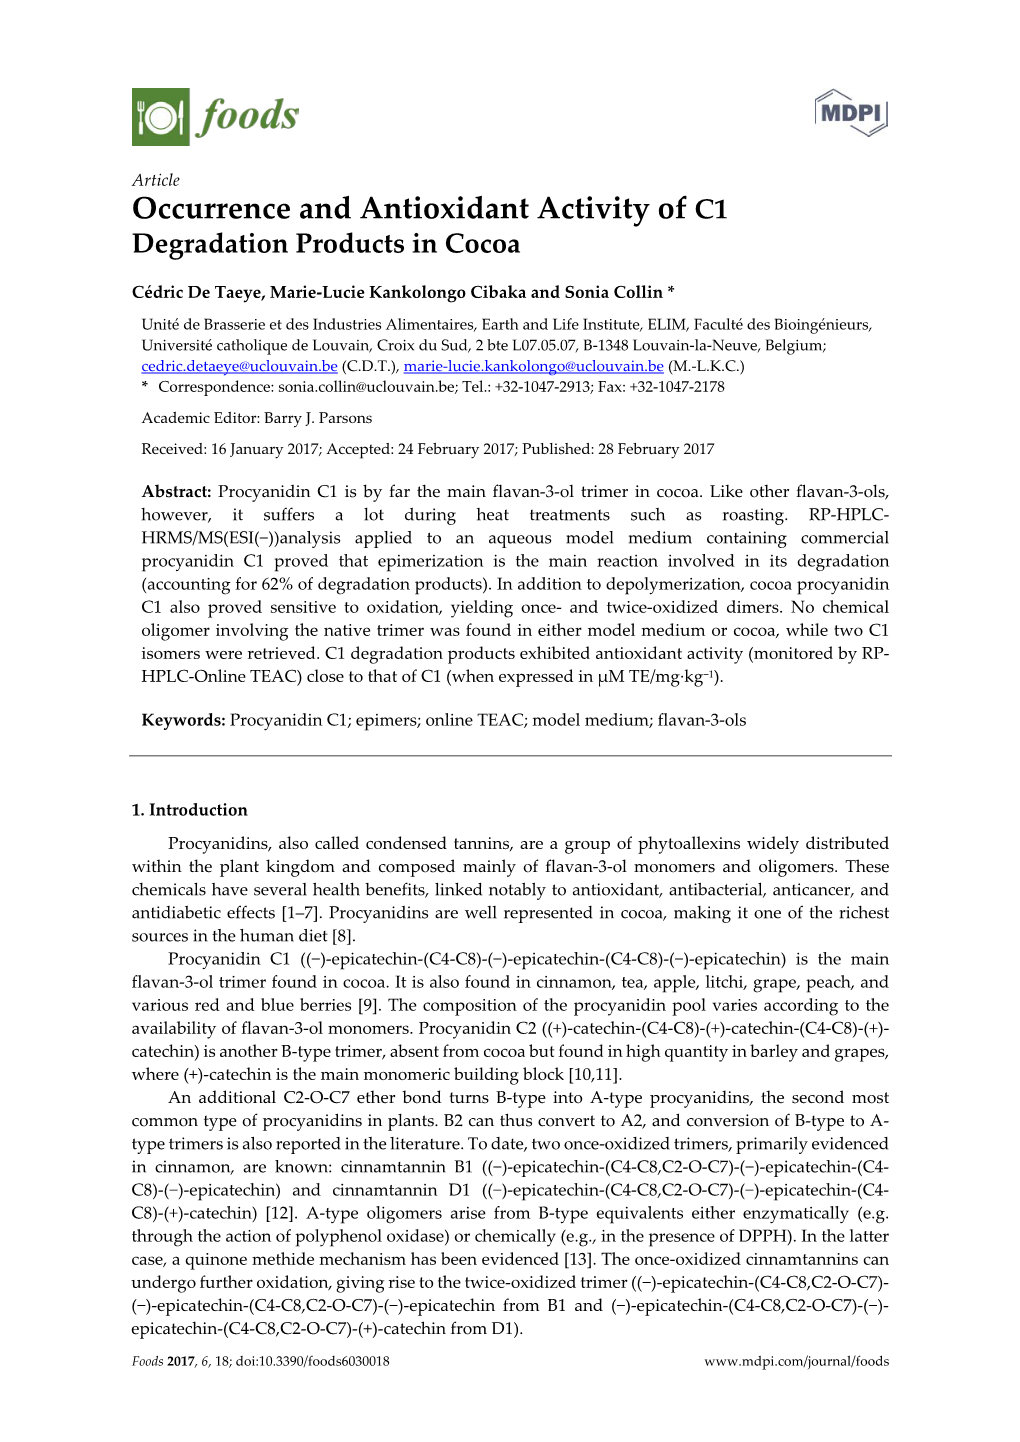 Article Occurrence and Antioxidant Activity of C1 Degradation Products in Cocoa